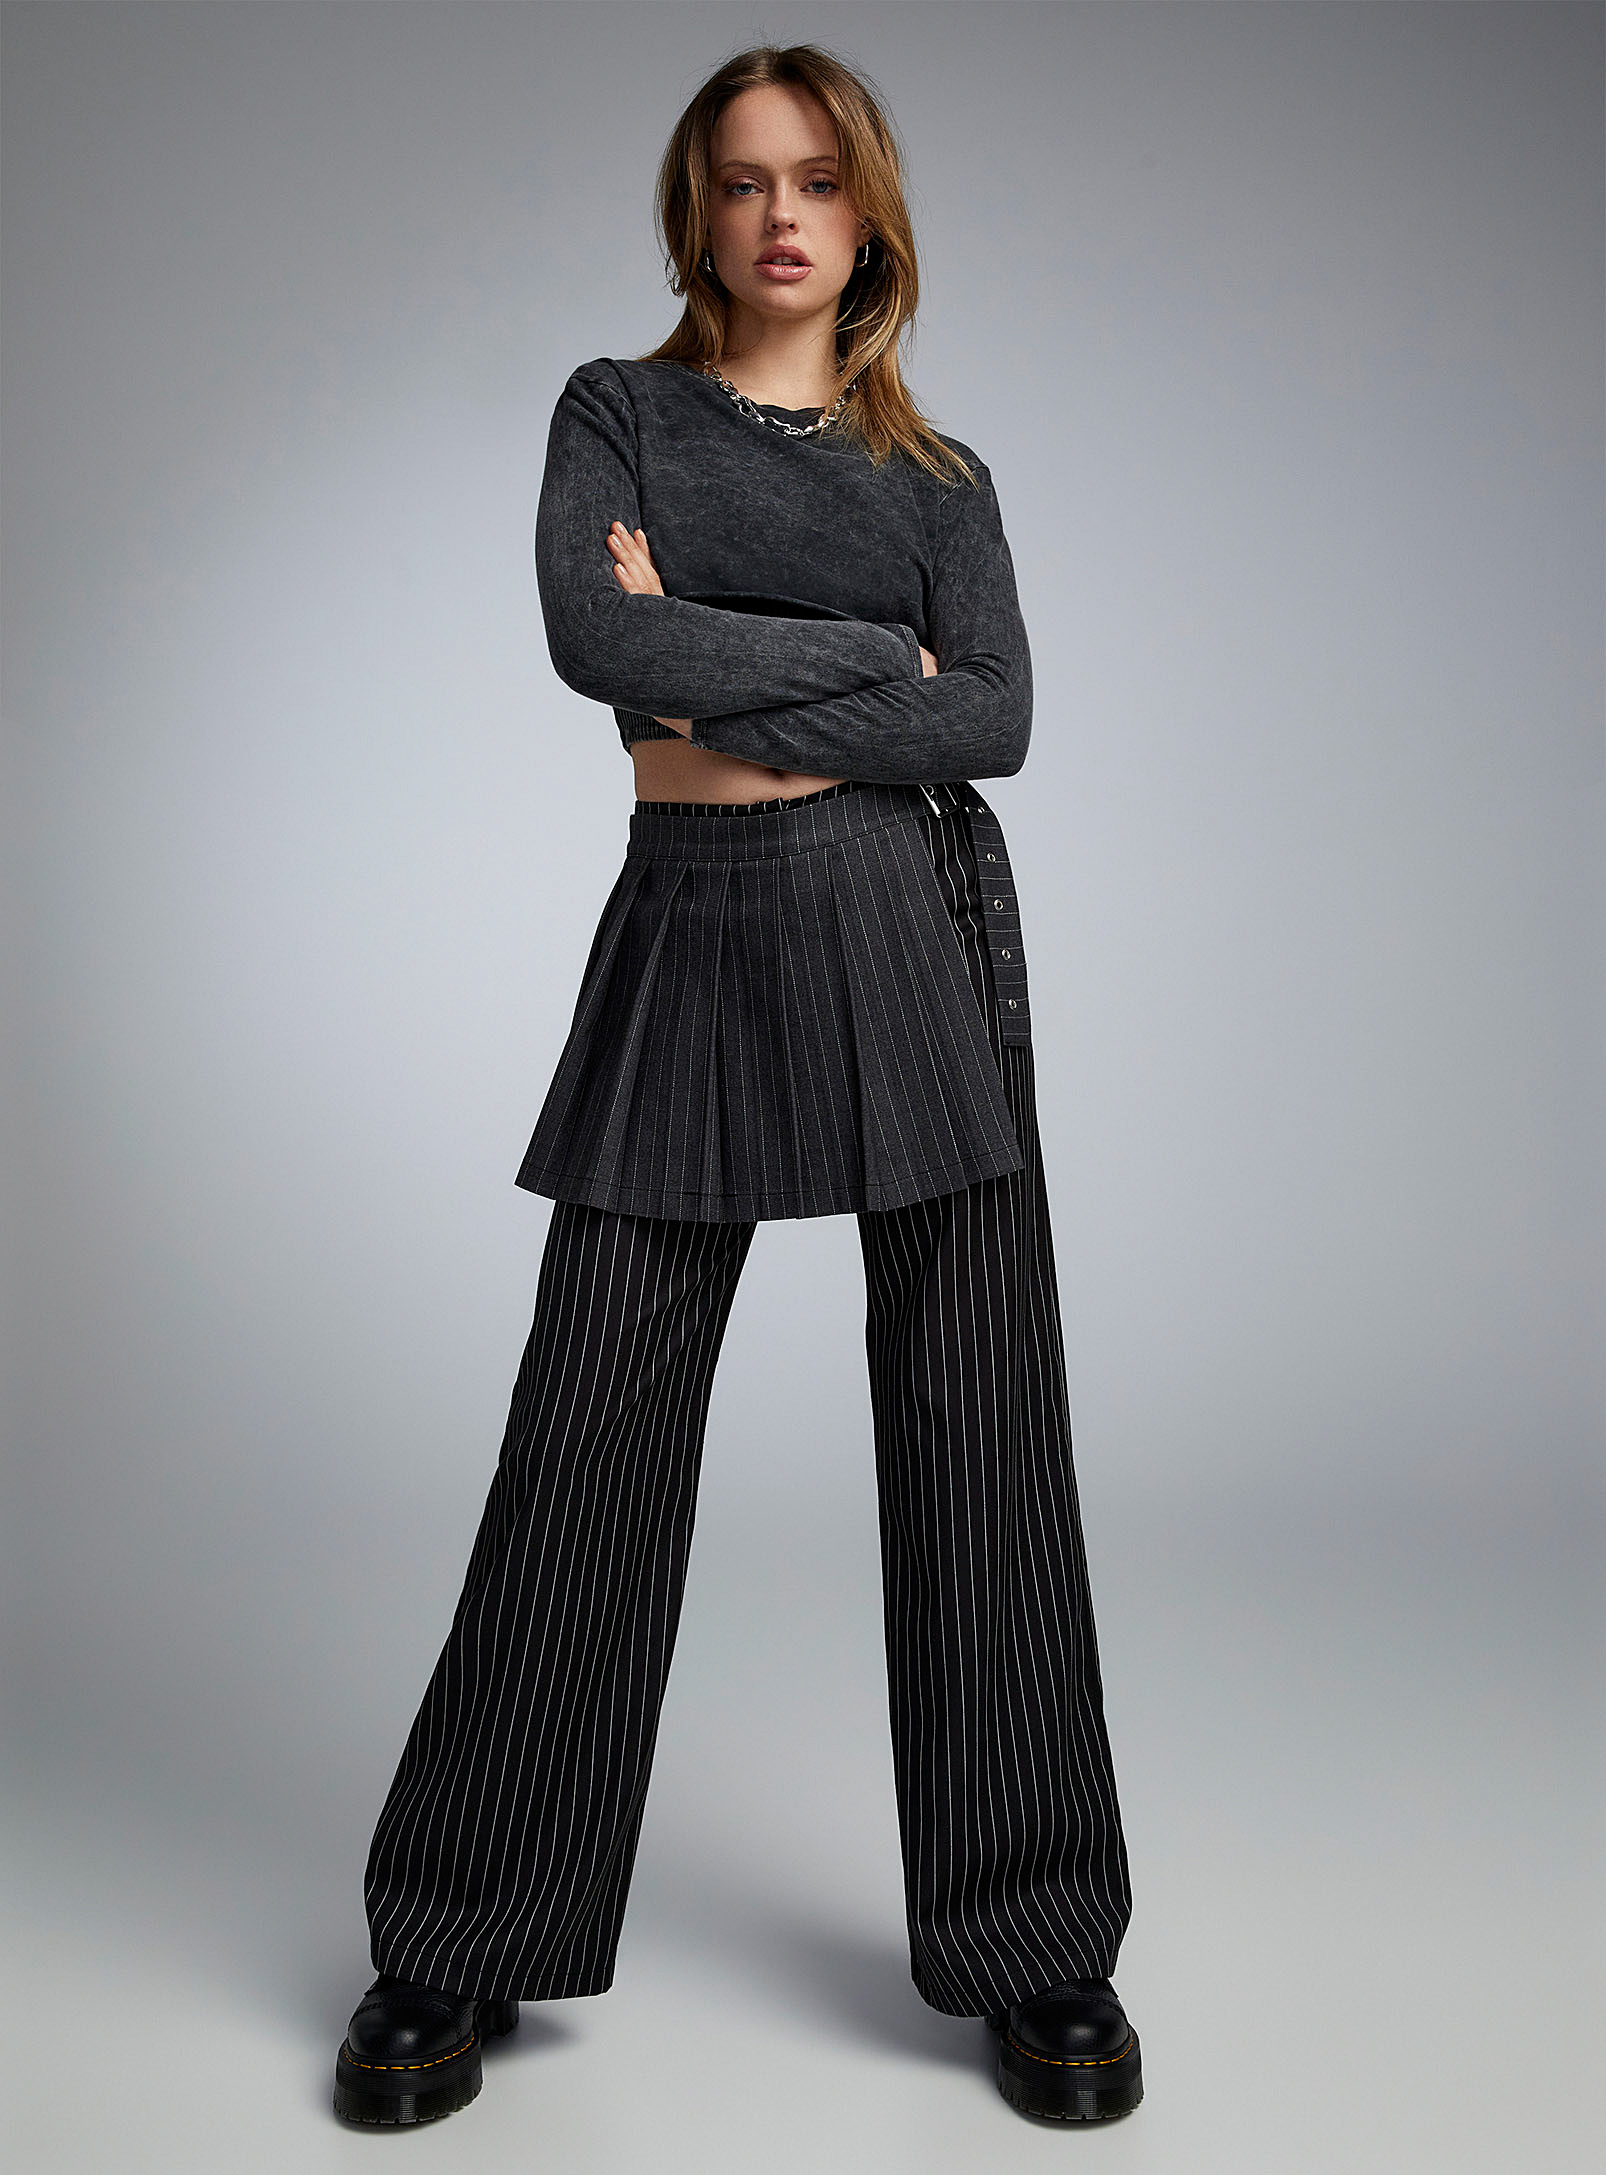 The Ragged Priest - Women's Striped skirt pant